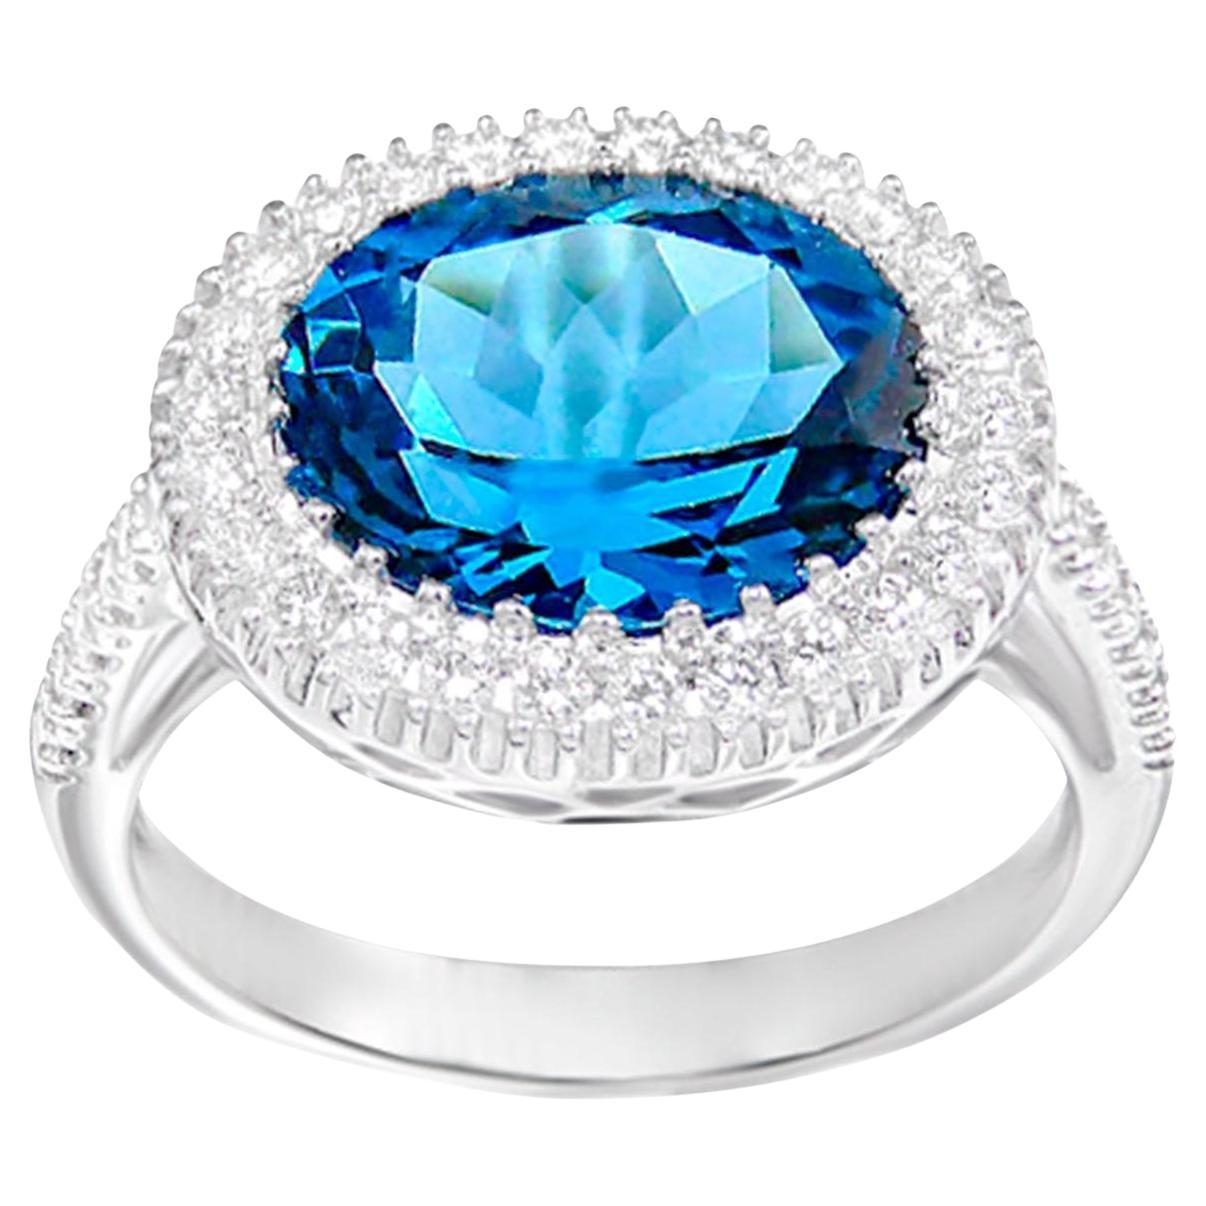 London Blue Topaz Ring With Diamonds 4.53 Carats 18K White Gold For Sale